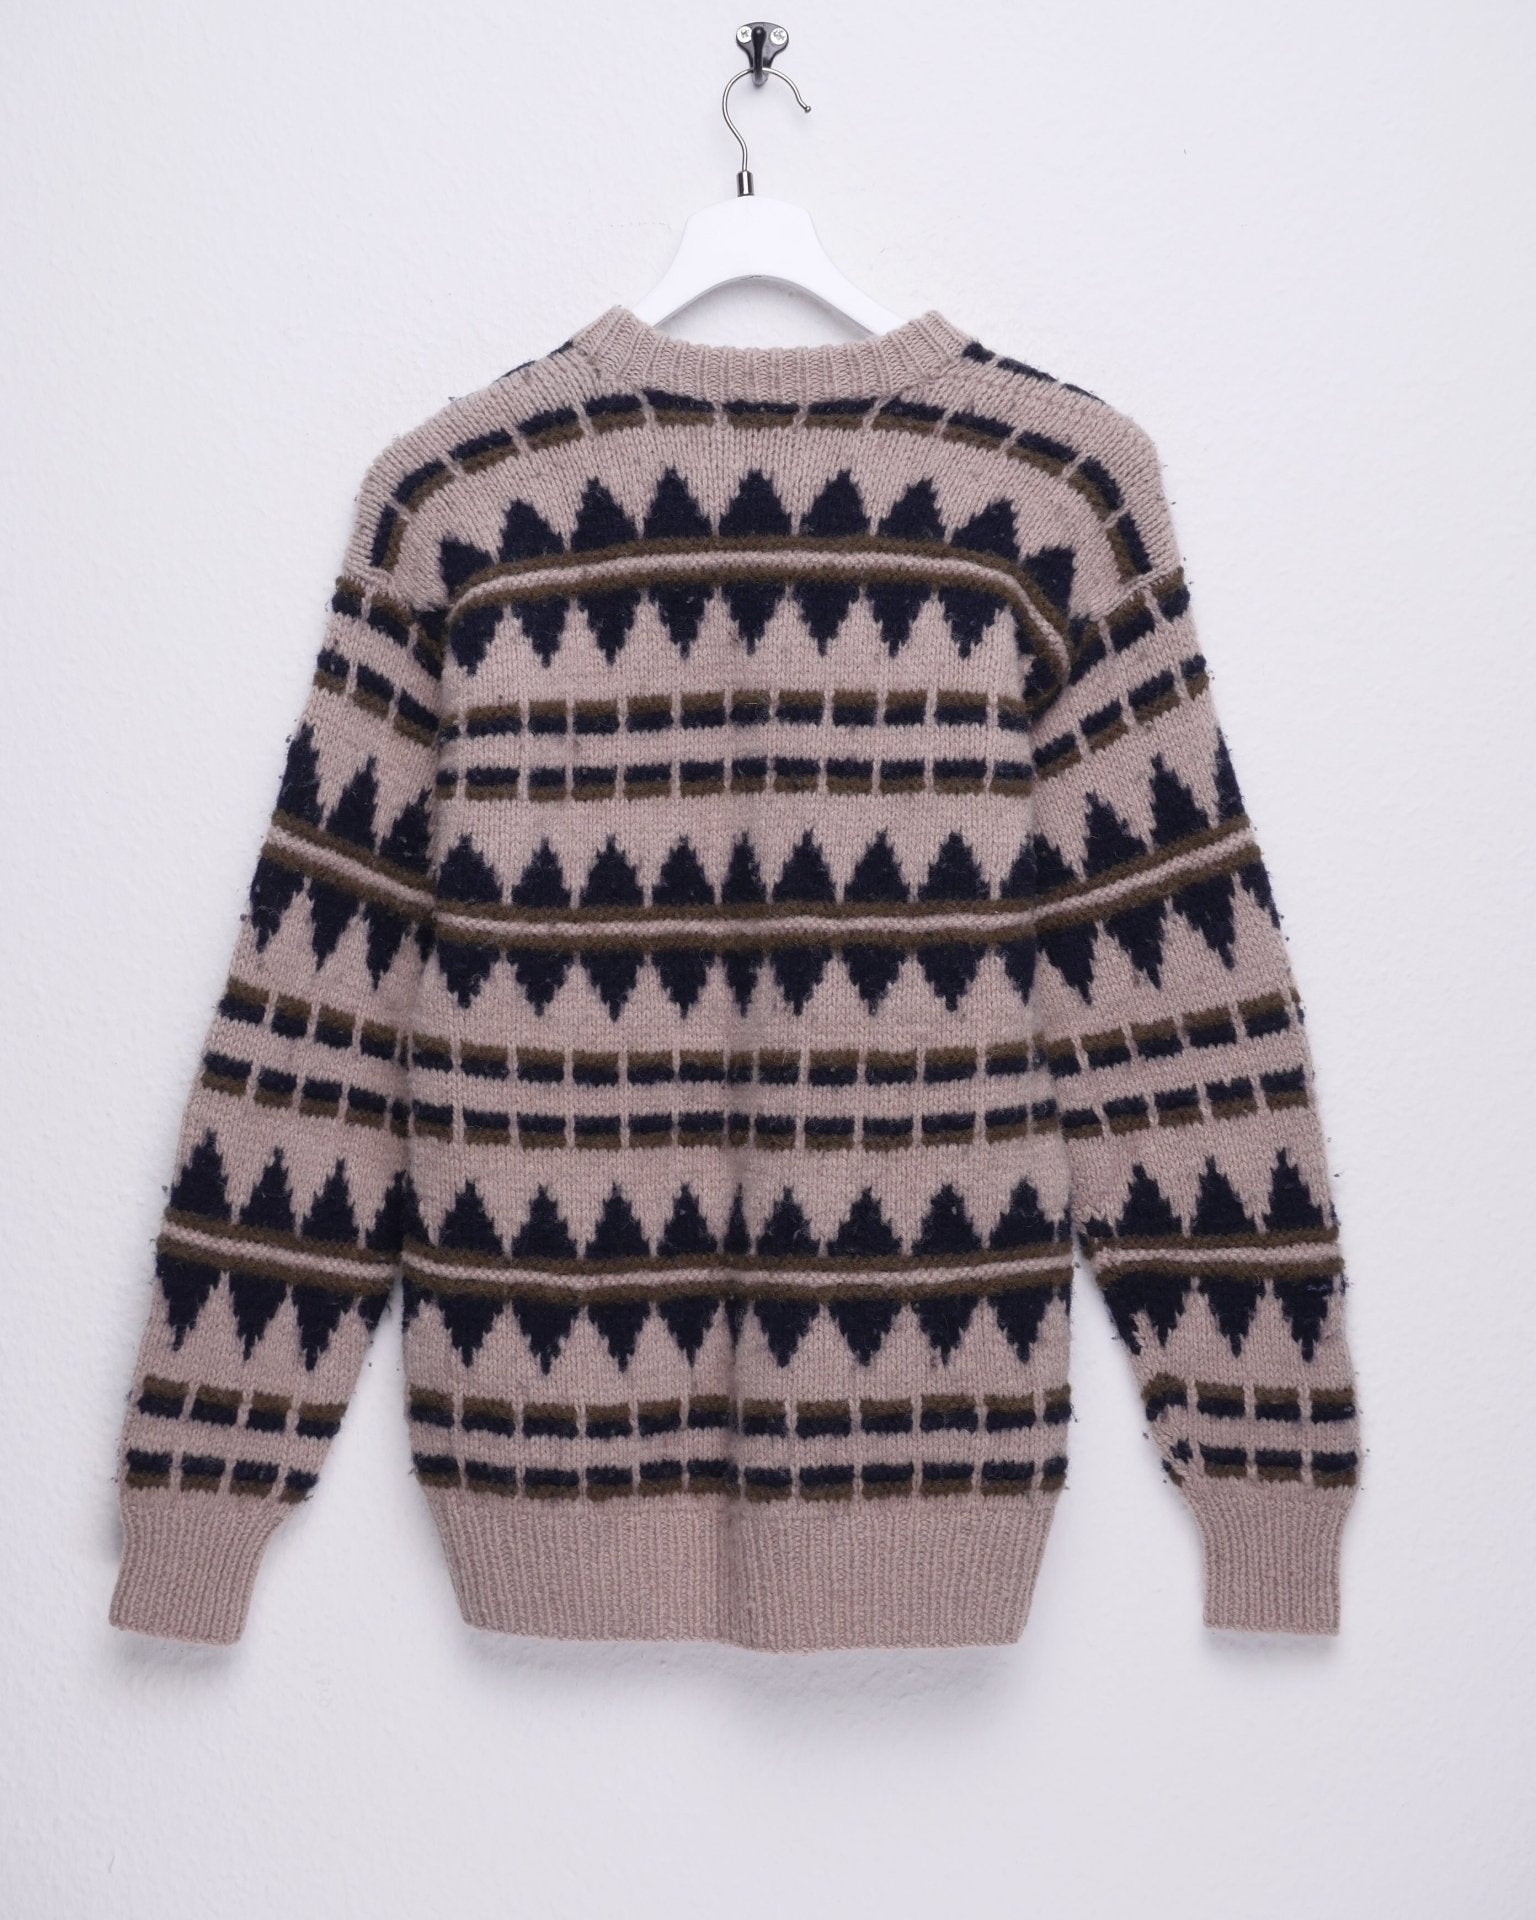 Knitted multicolored Vintage Sweater - Peeces